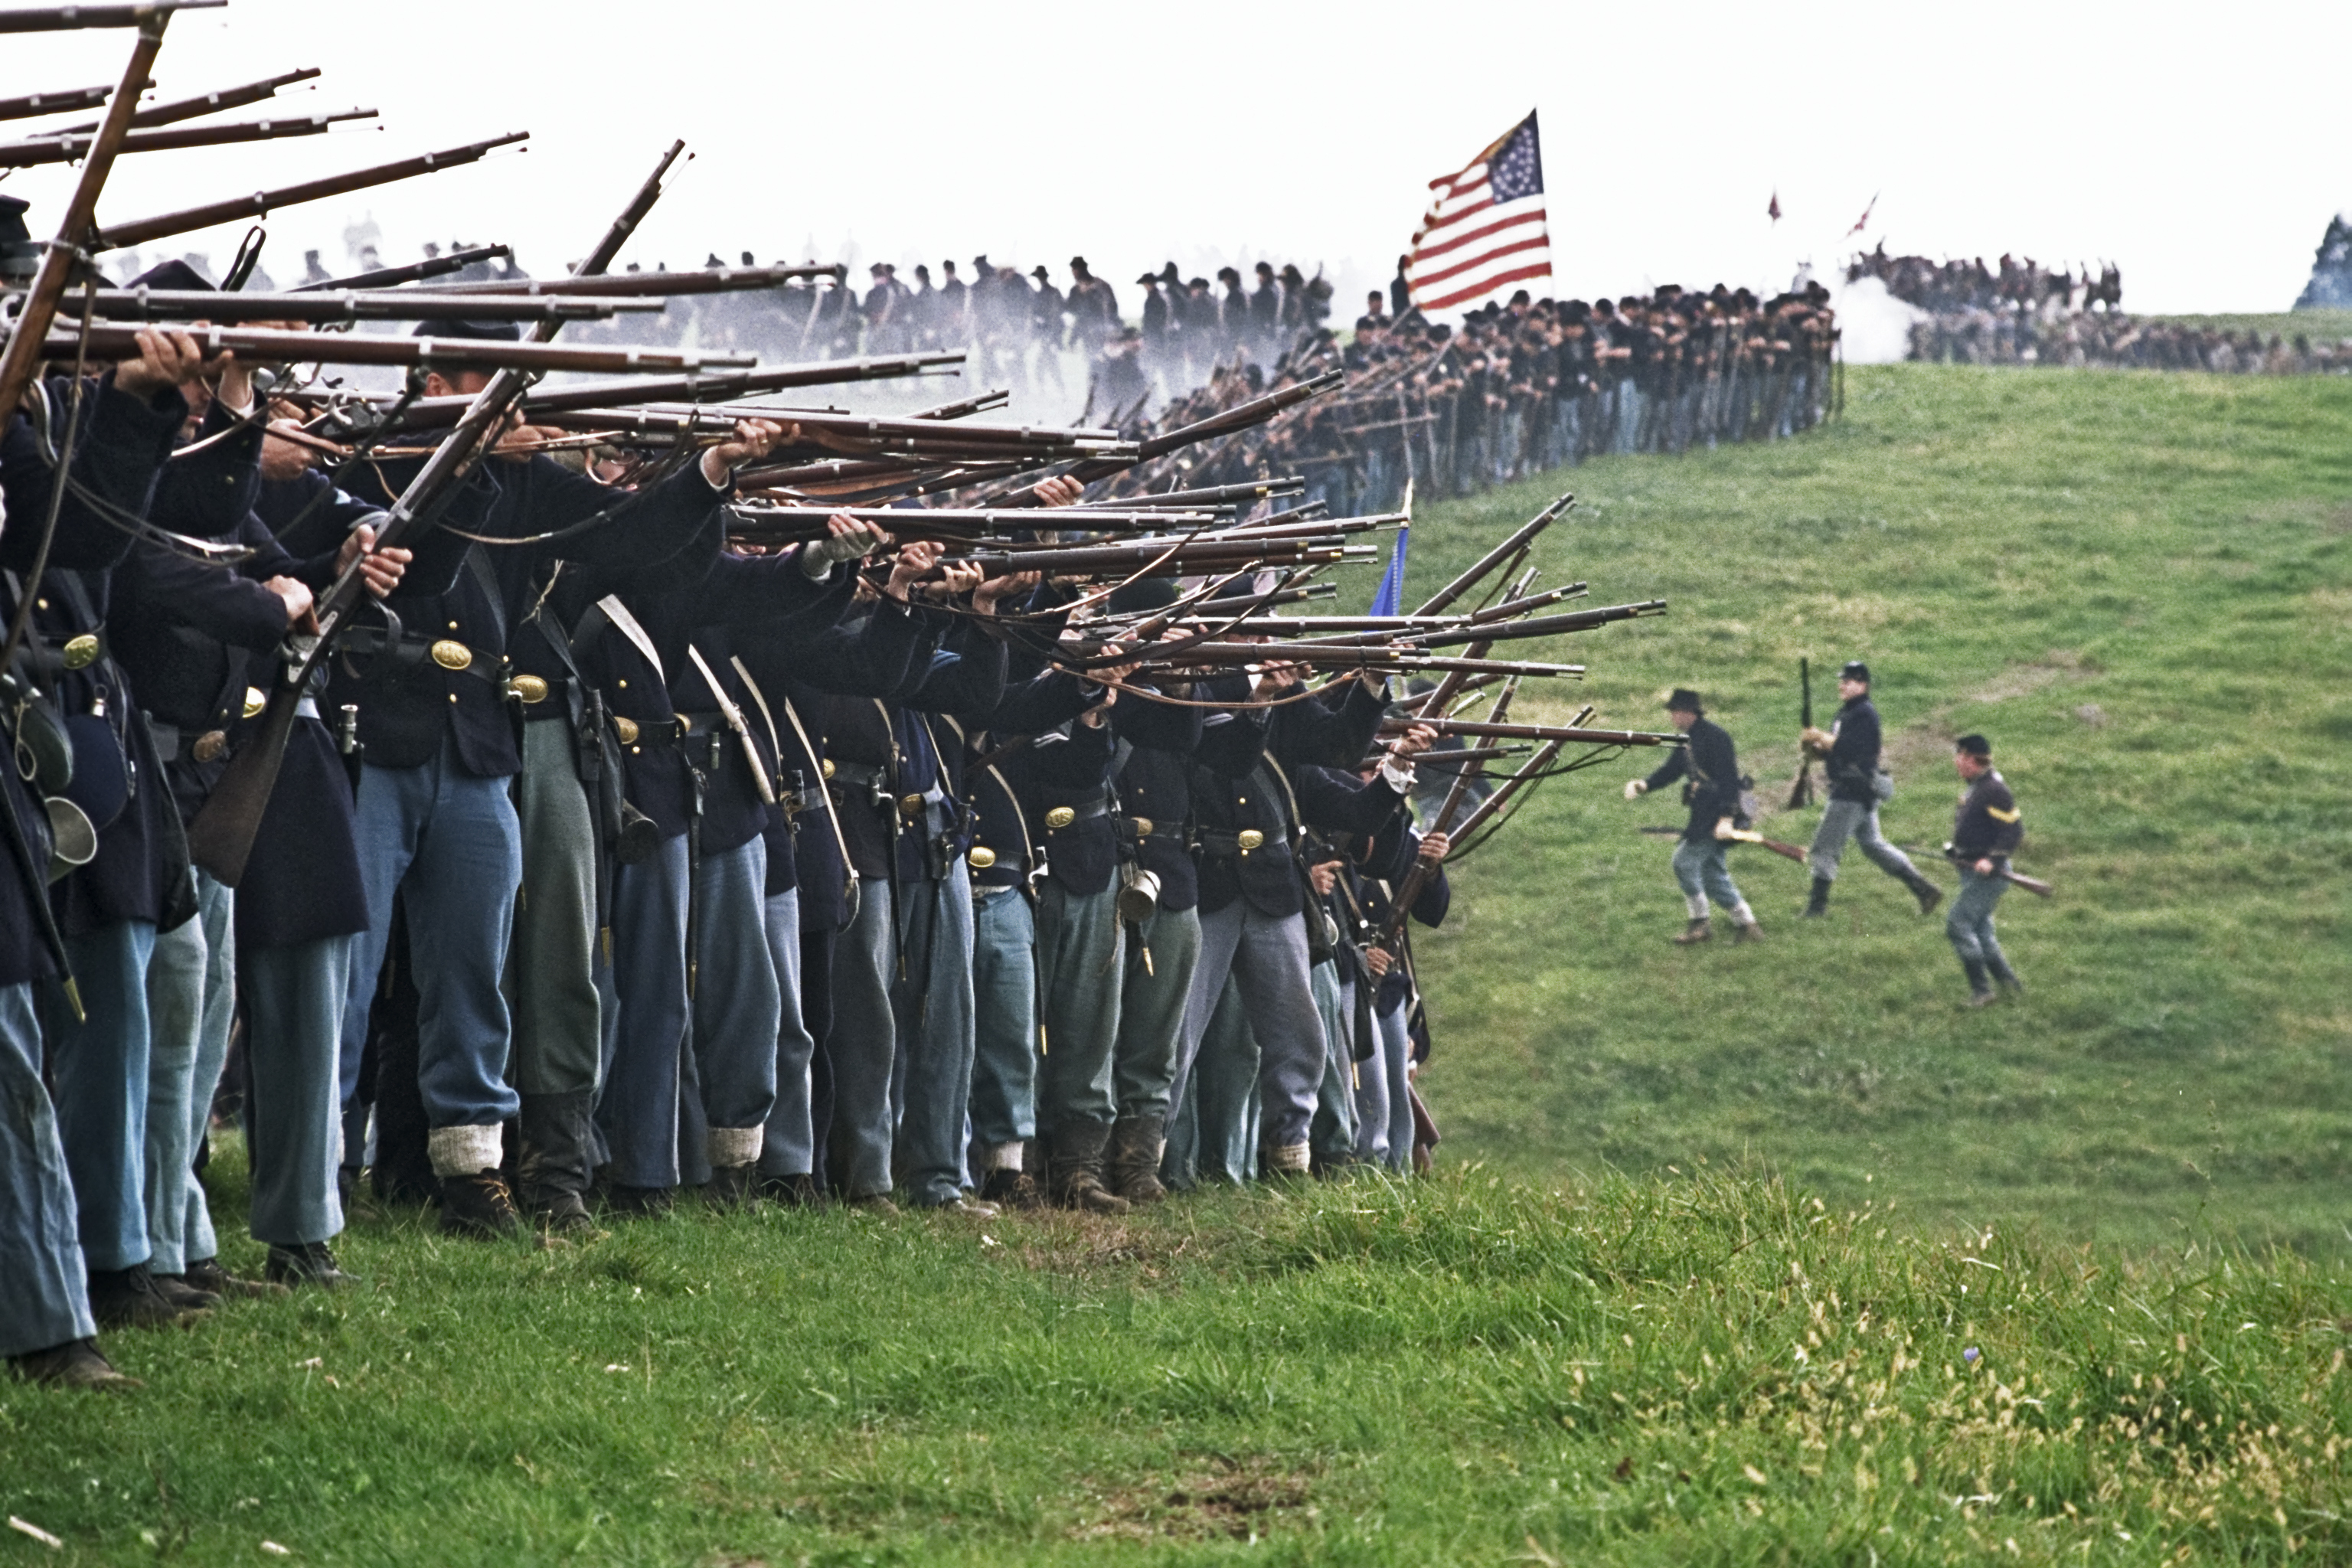 A reenactment of a historical battle with soldiers in uniforms holding rifles, carrying an American flag